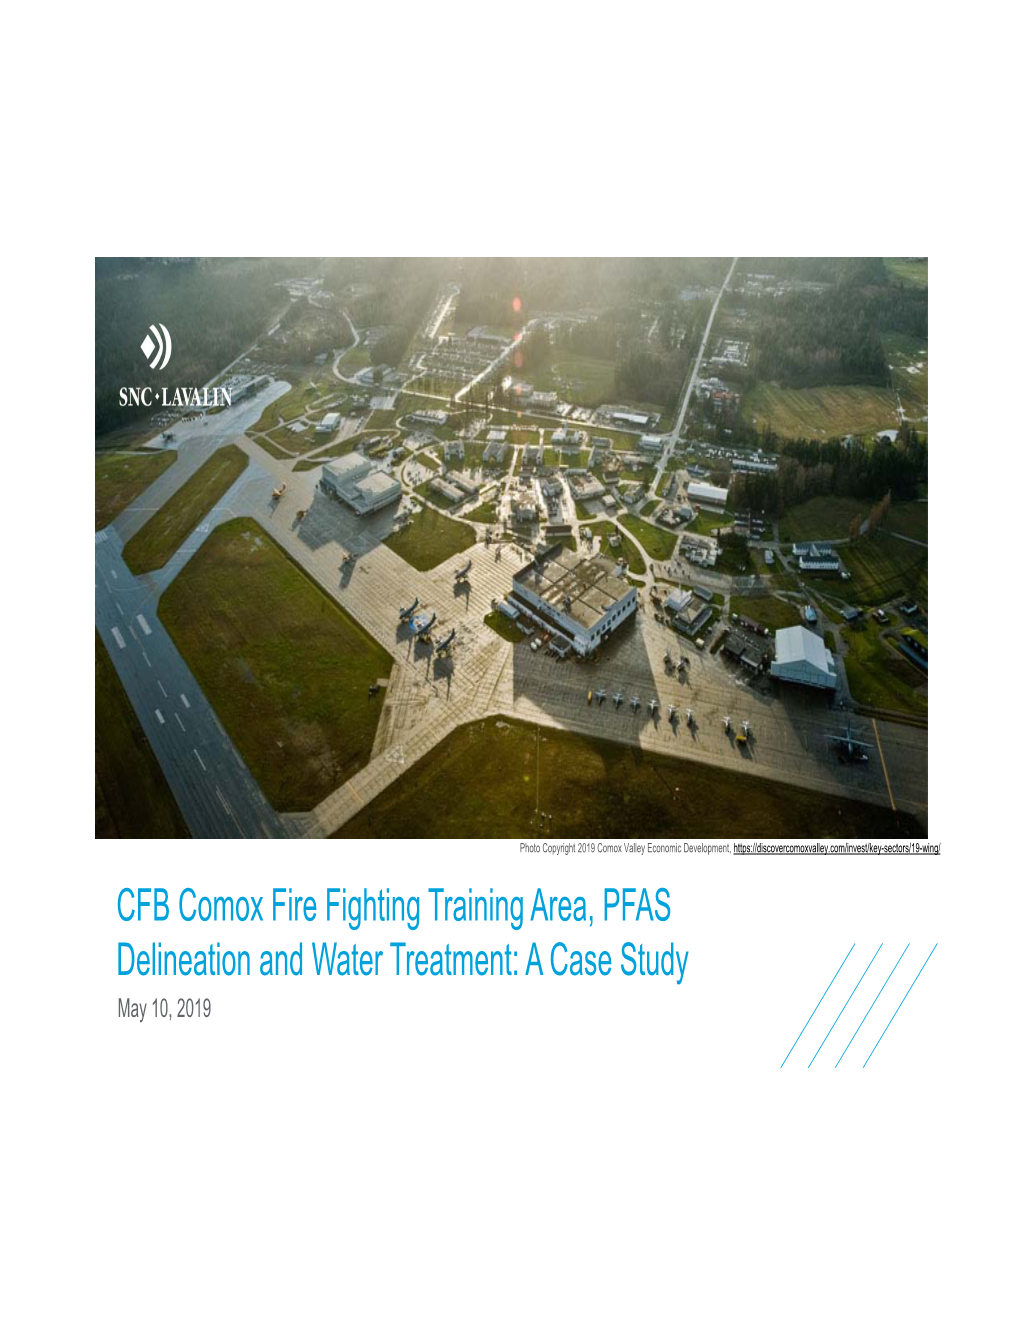 CFB Comox Fire Fighting Training Area, PFAS Delineation and Water Treatment: a Case Study